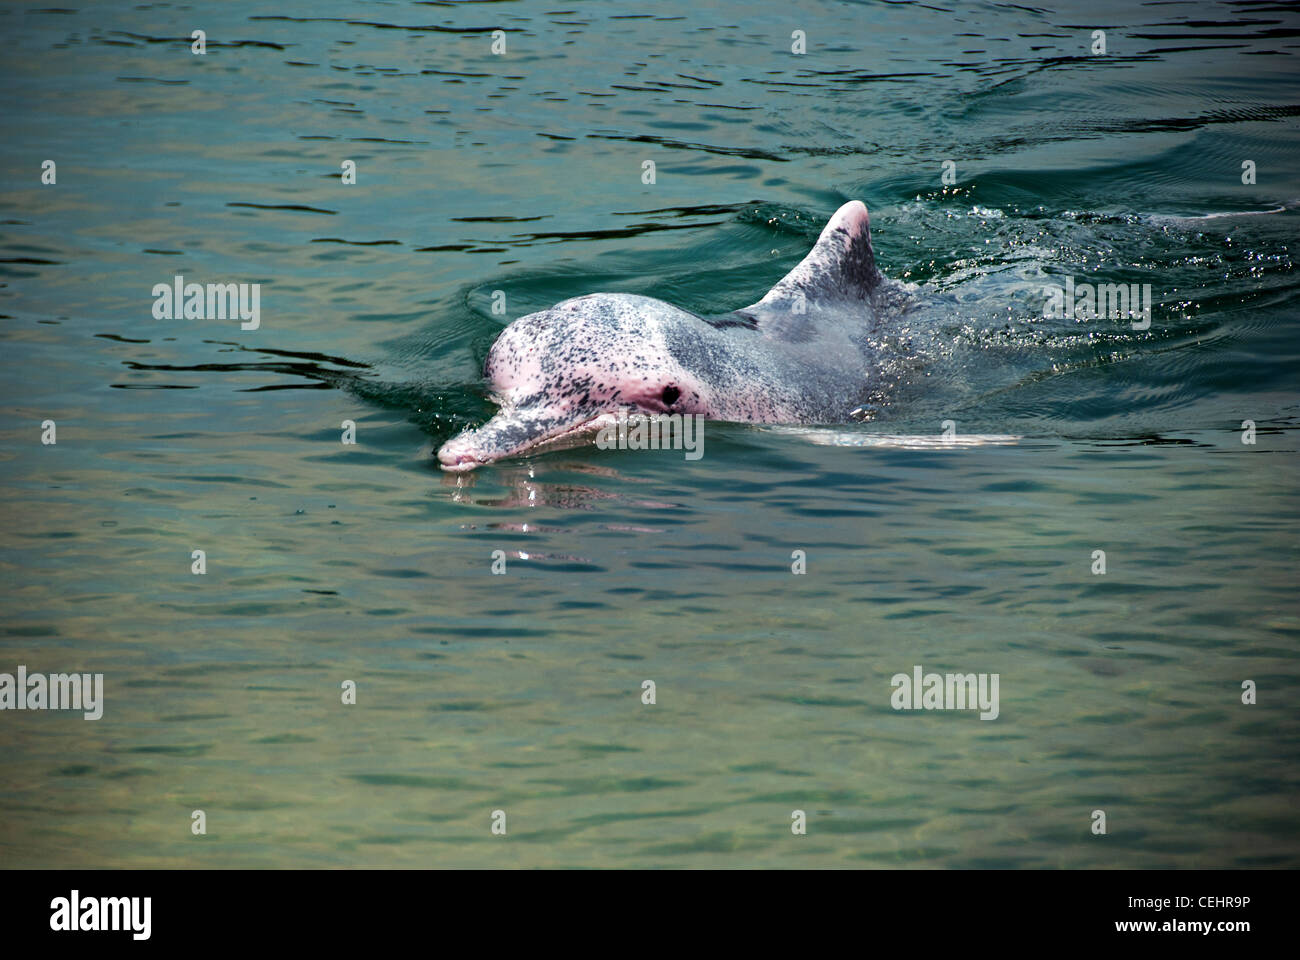 rare pink dolphin in water near Singapore Stock Photo